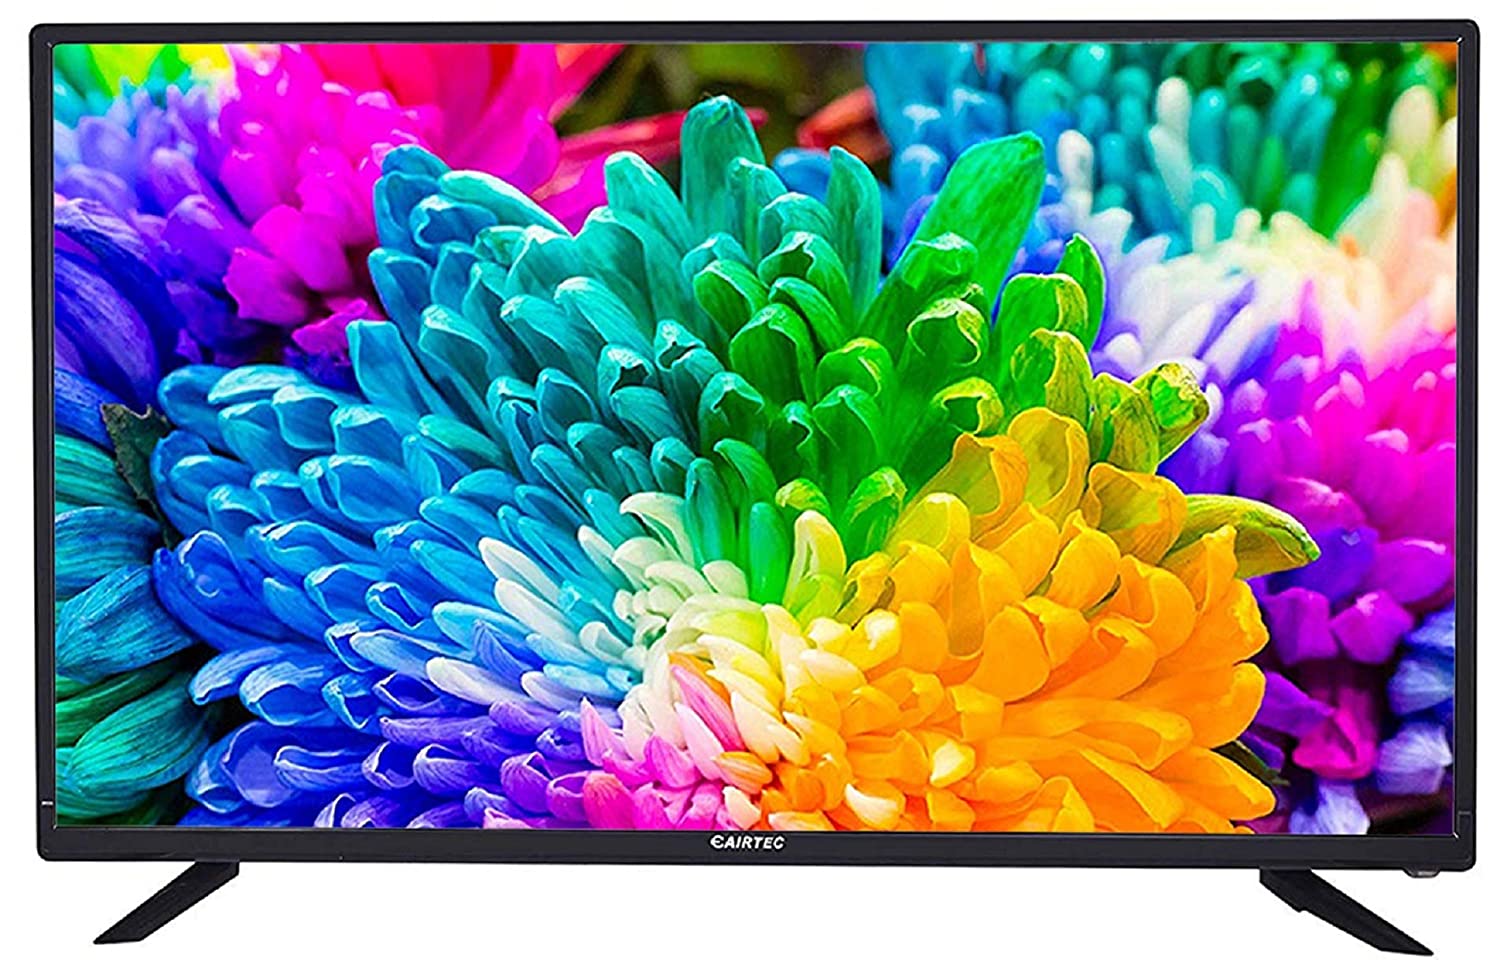 All About The LED Television-629b8612